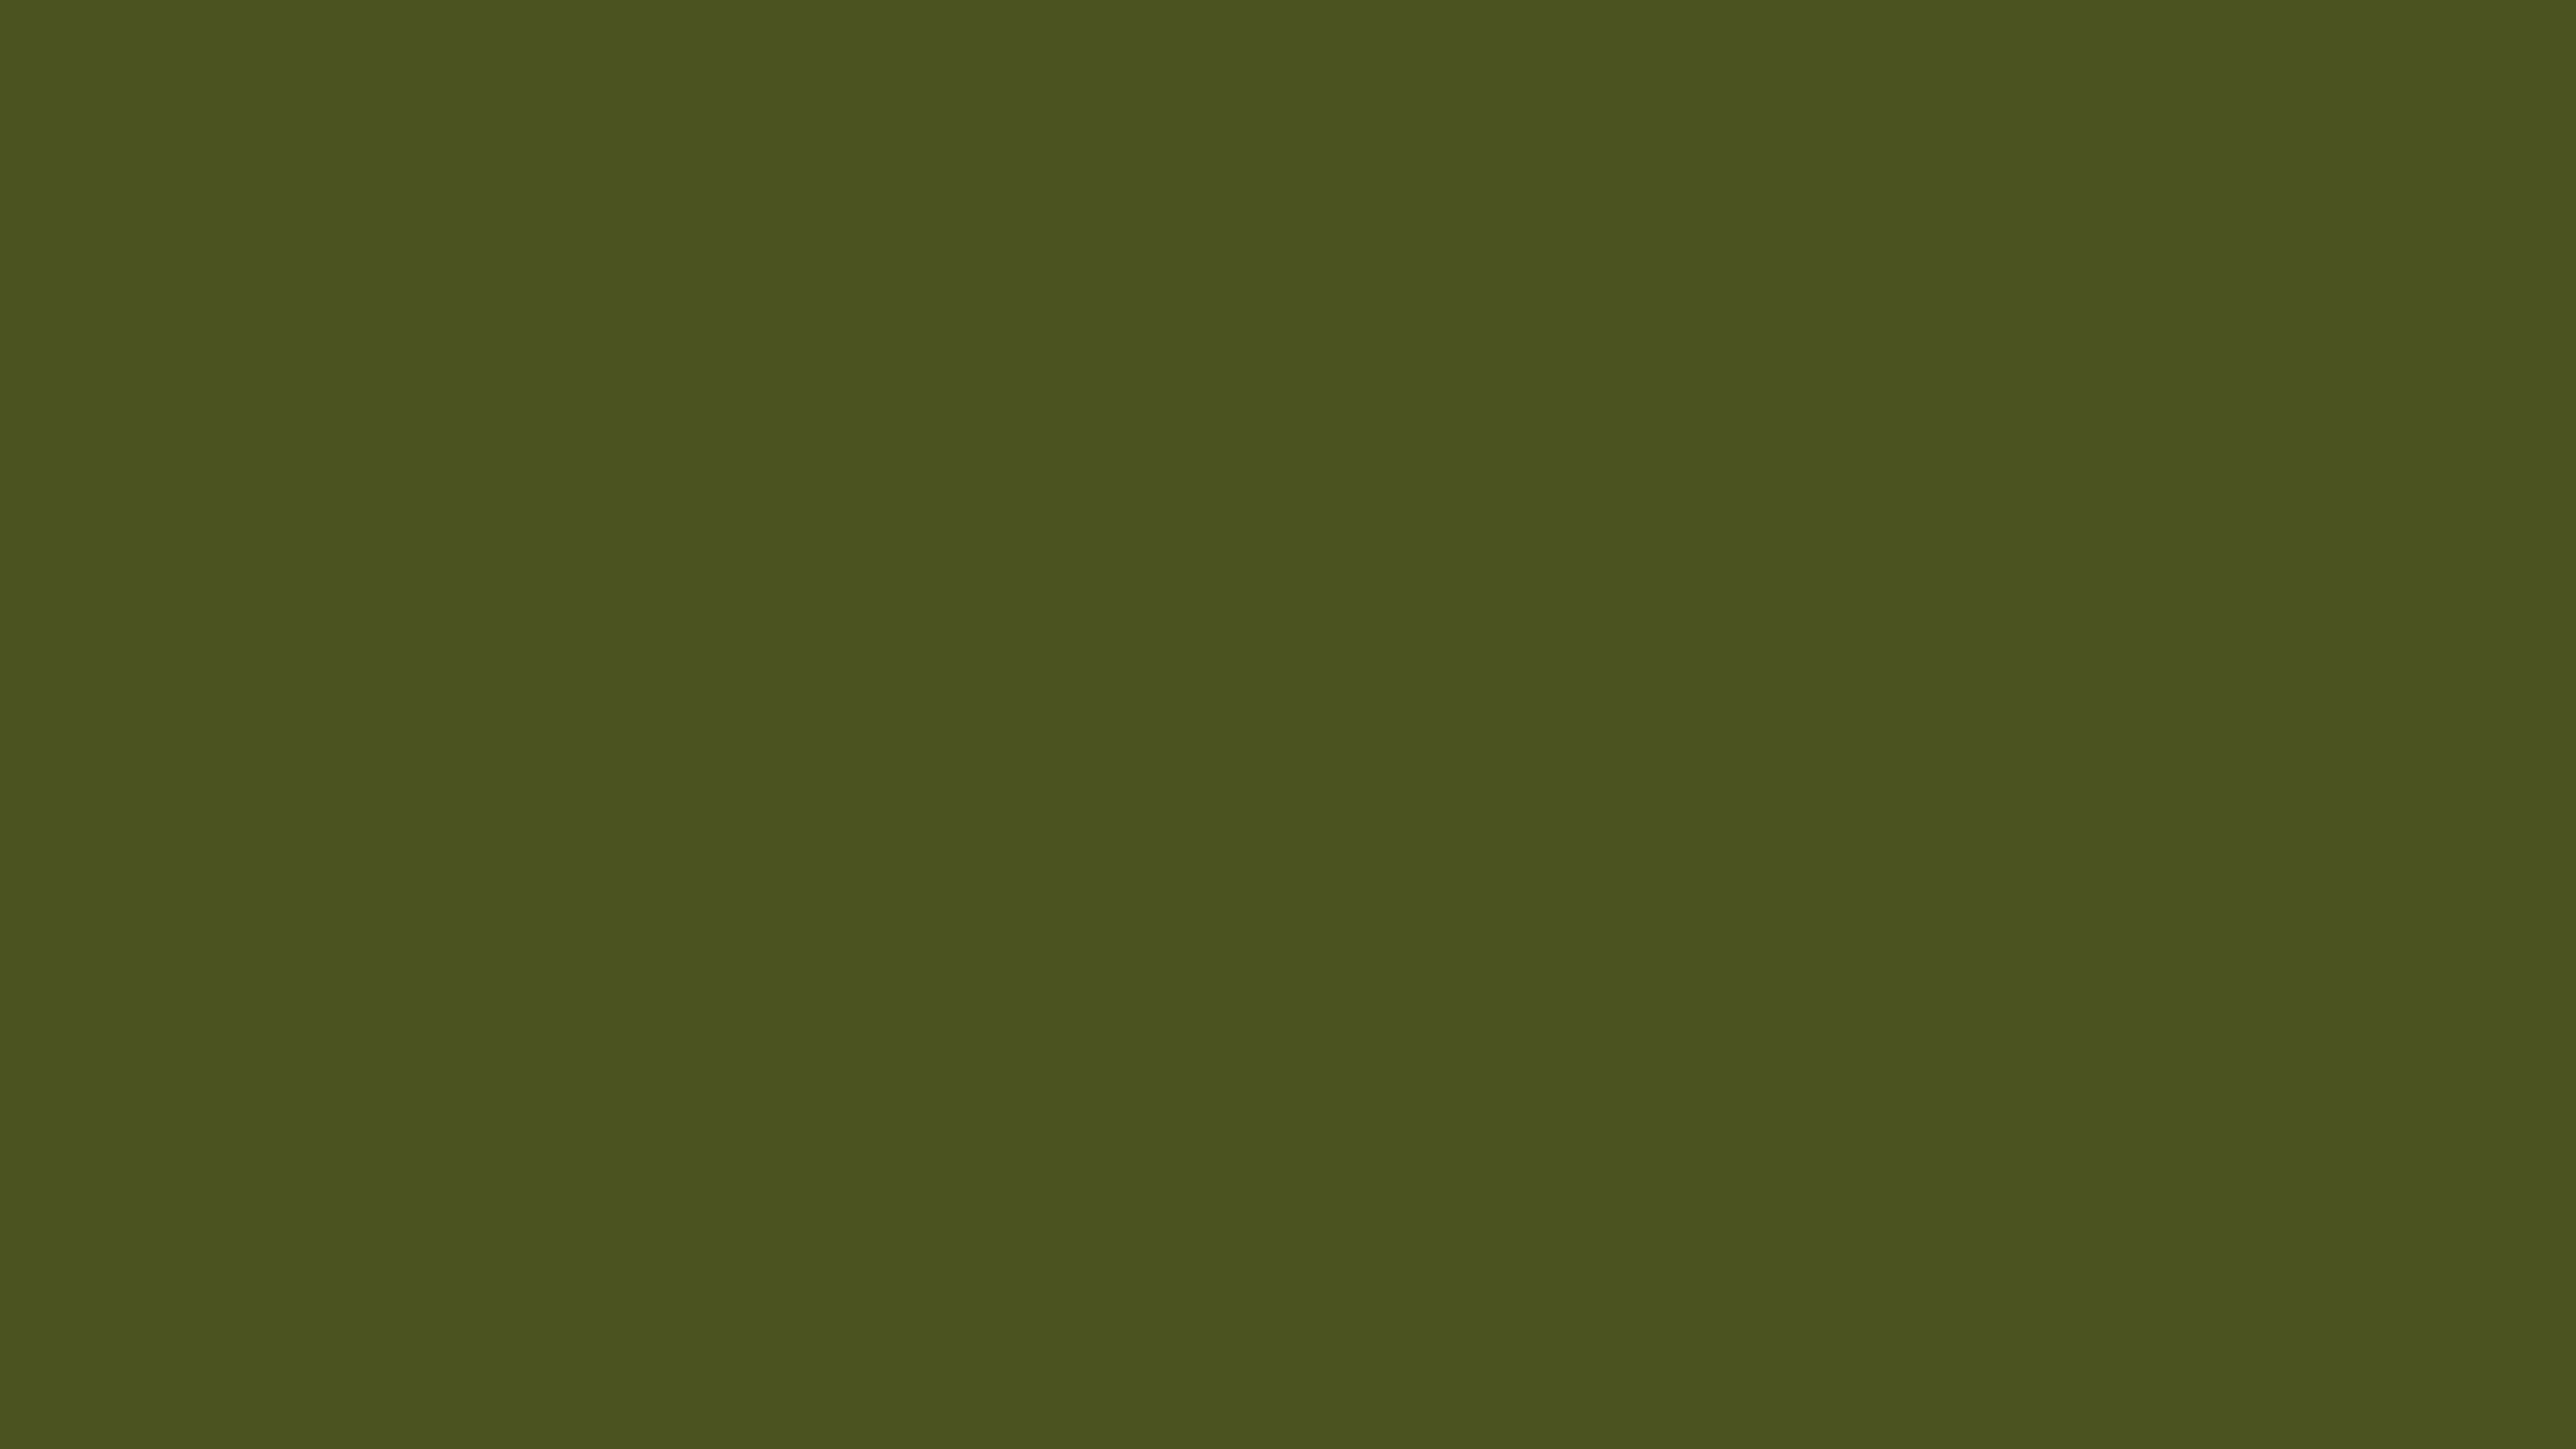 7680x4320 Army Green Solid Color Background